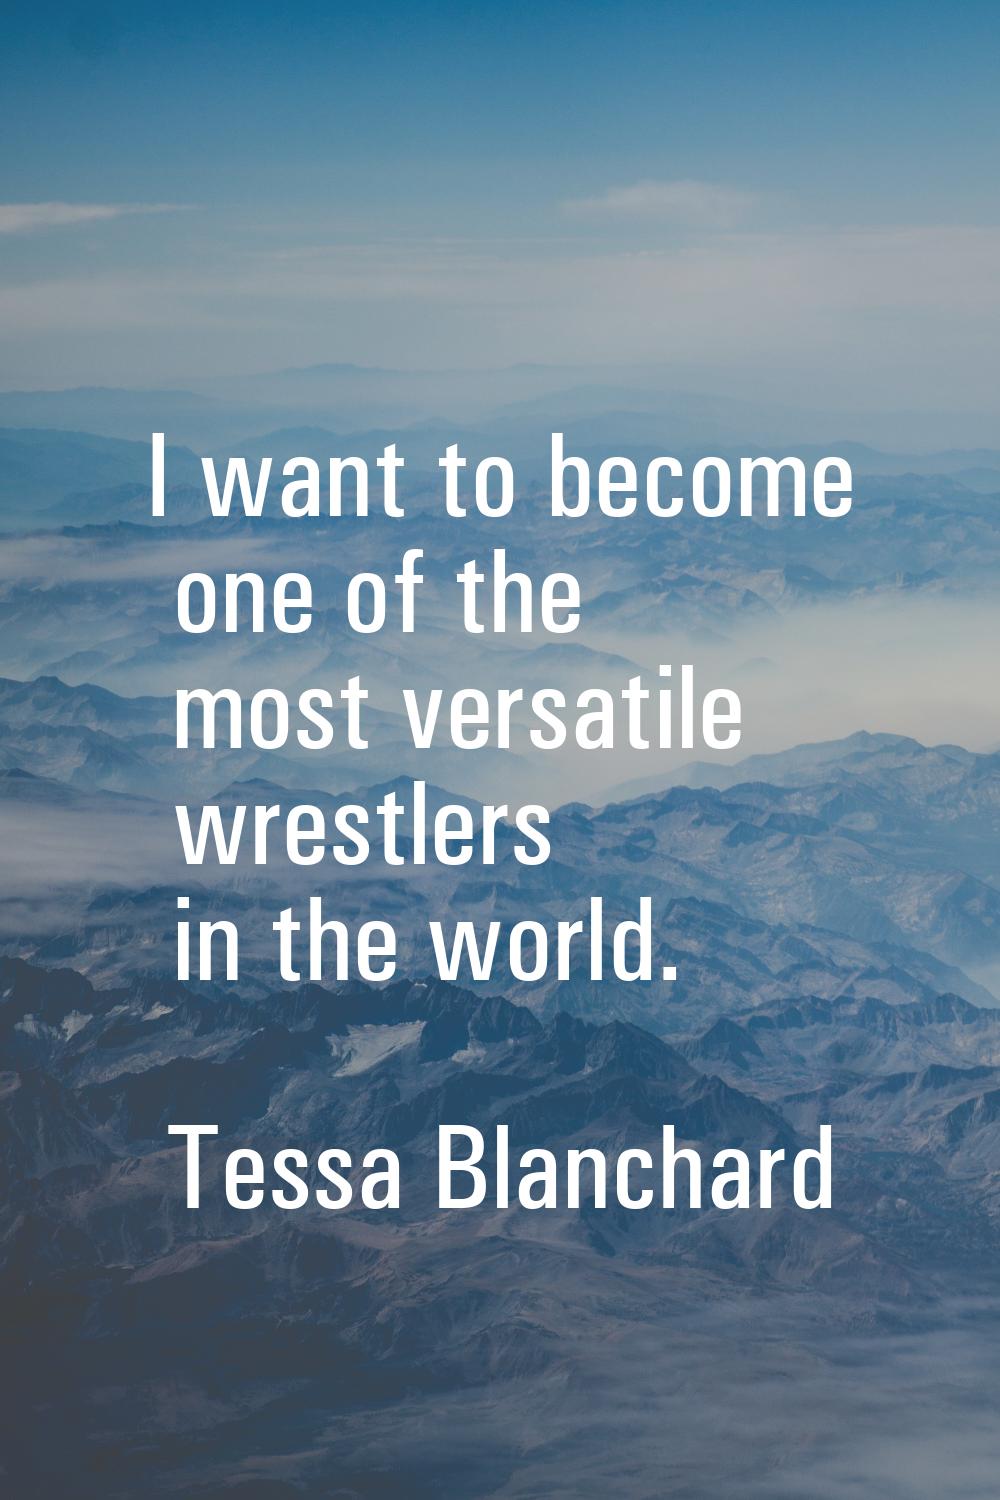 I want to become one of the most versatile wrestlers in the world.